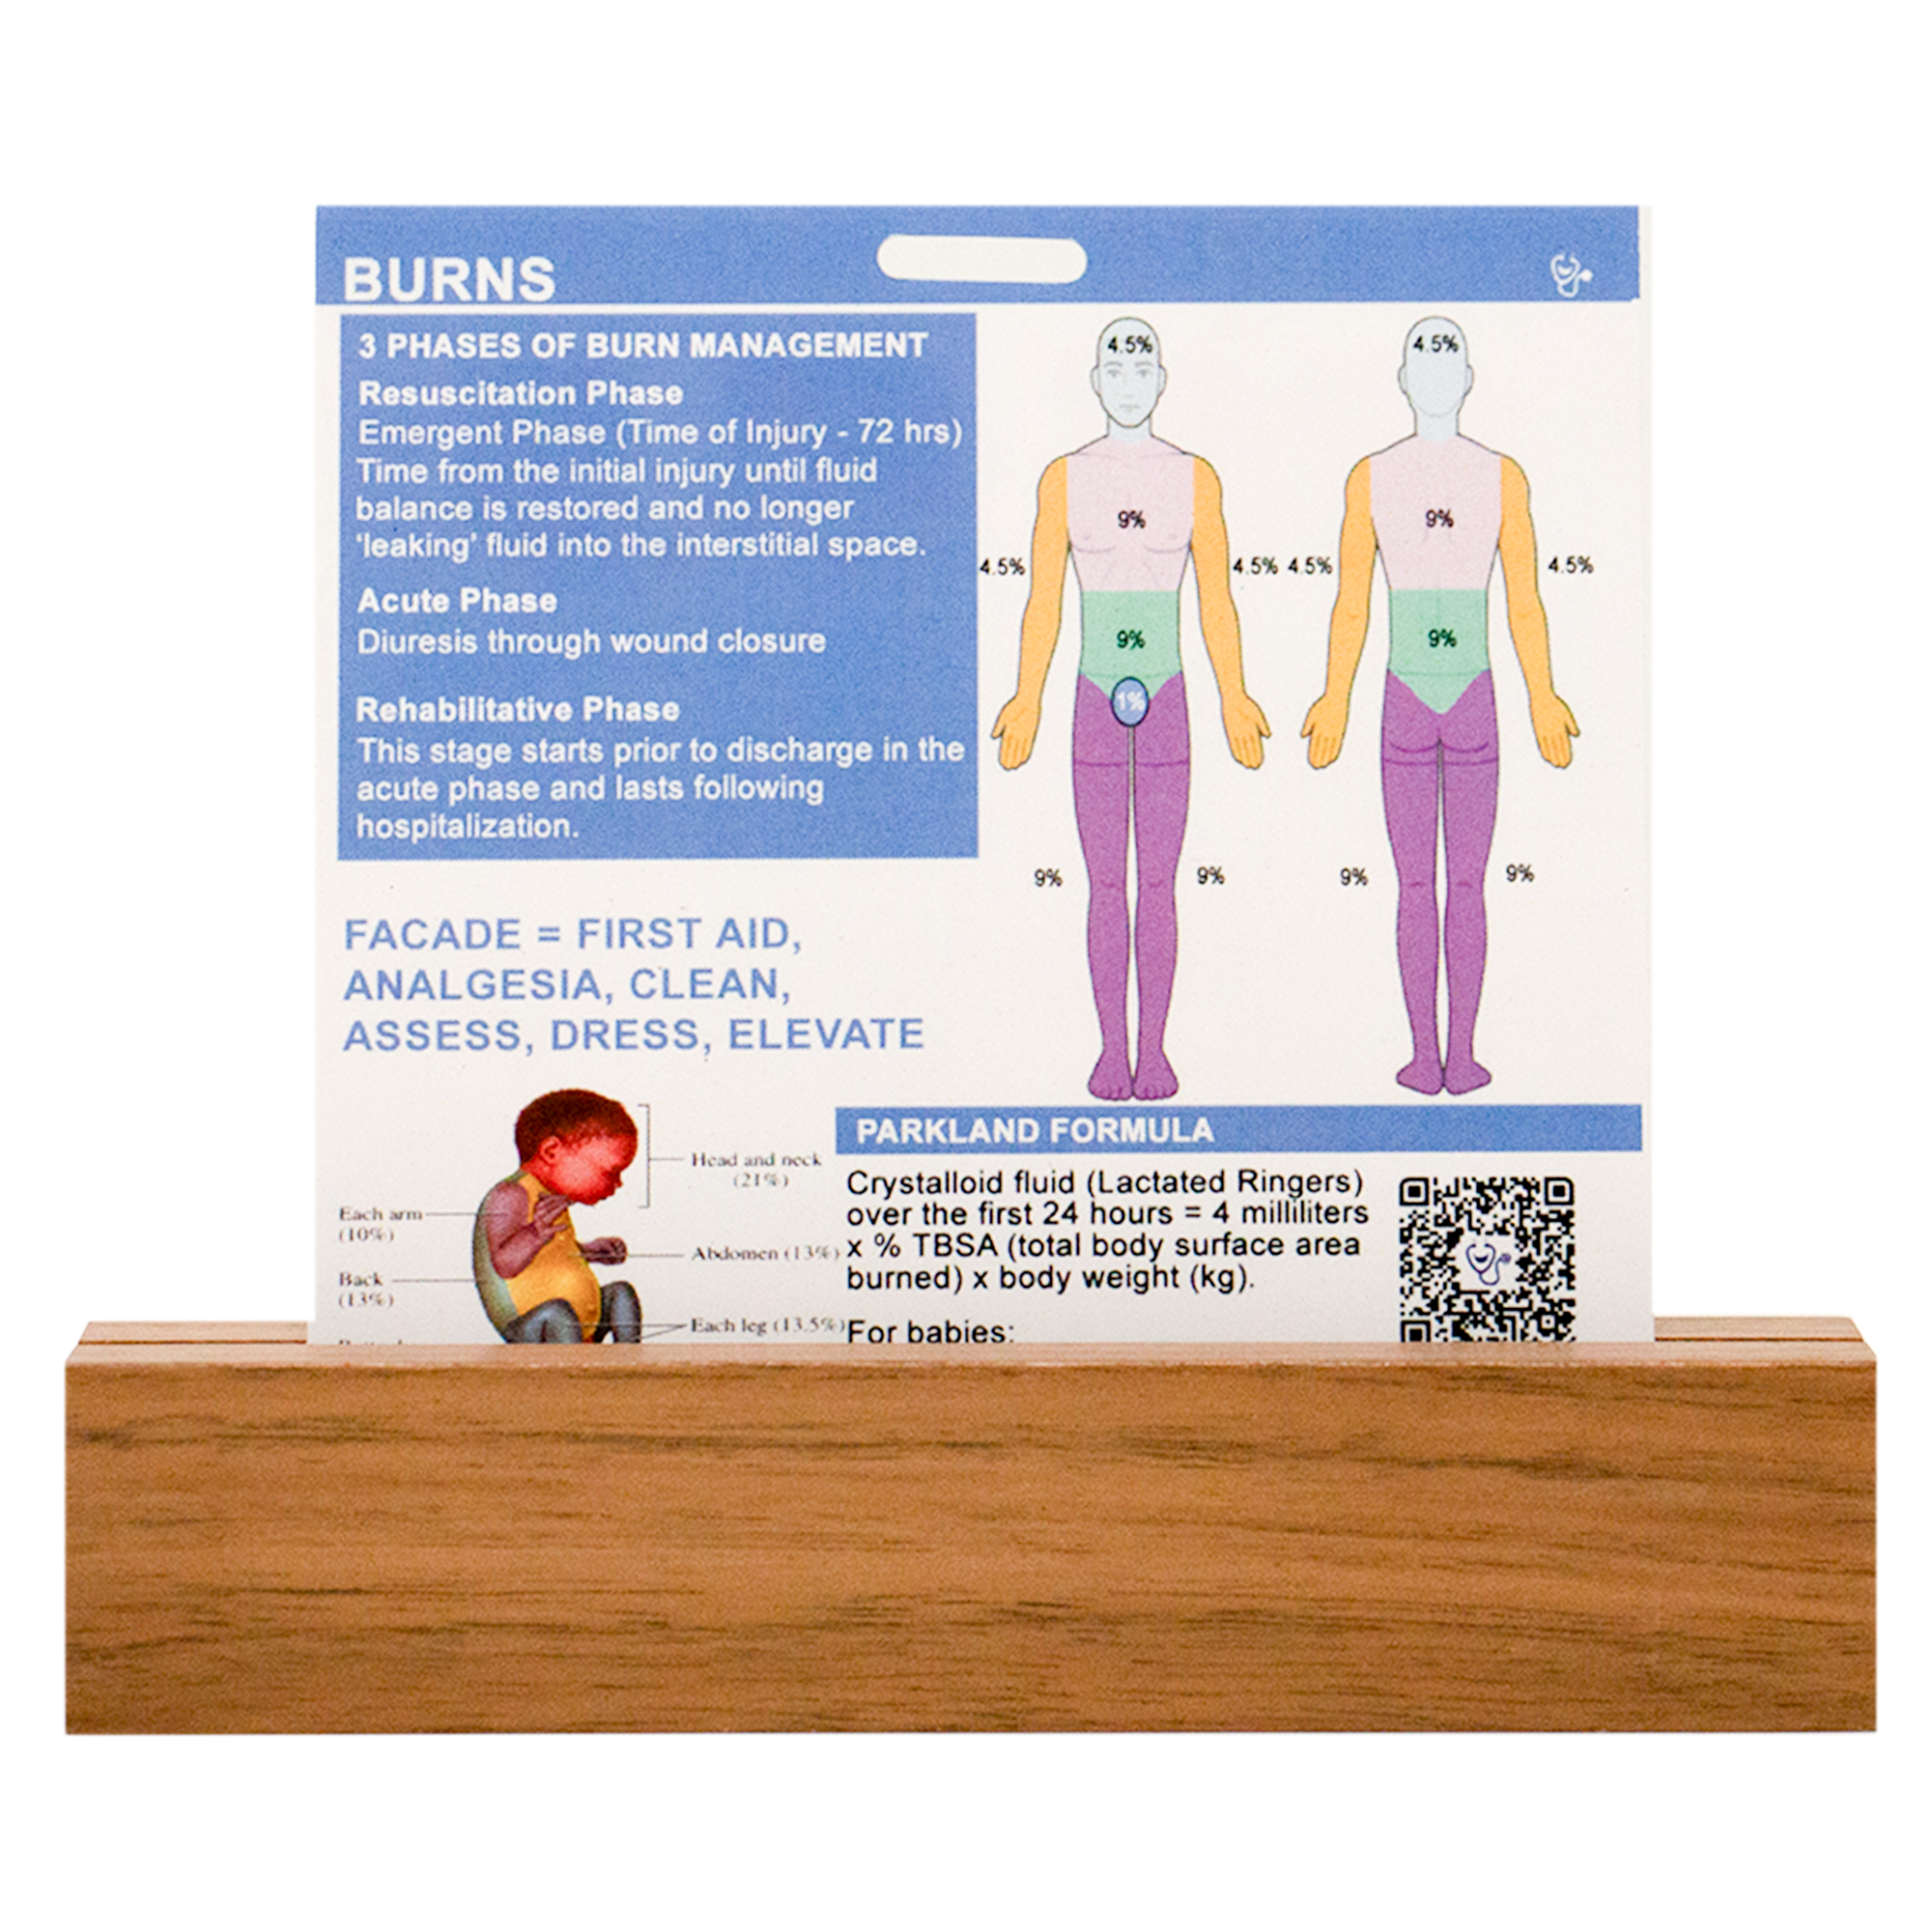 Side 2 of our Burn Badge for inpatient nurses contains the Parkland Formula for adults and infants as well as the phases of burn management and the pneumonic for dressing changes.